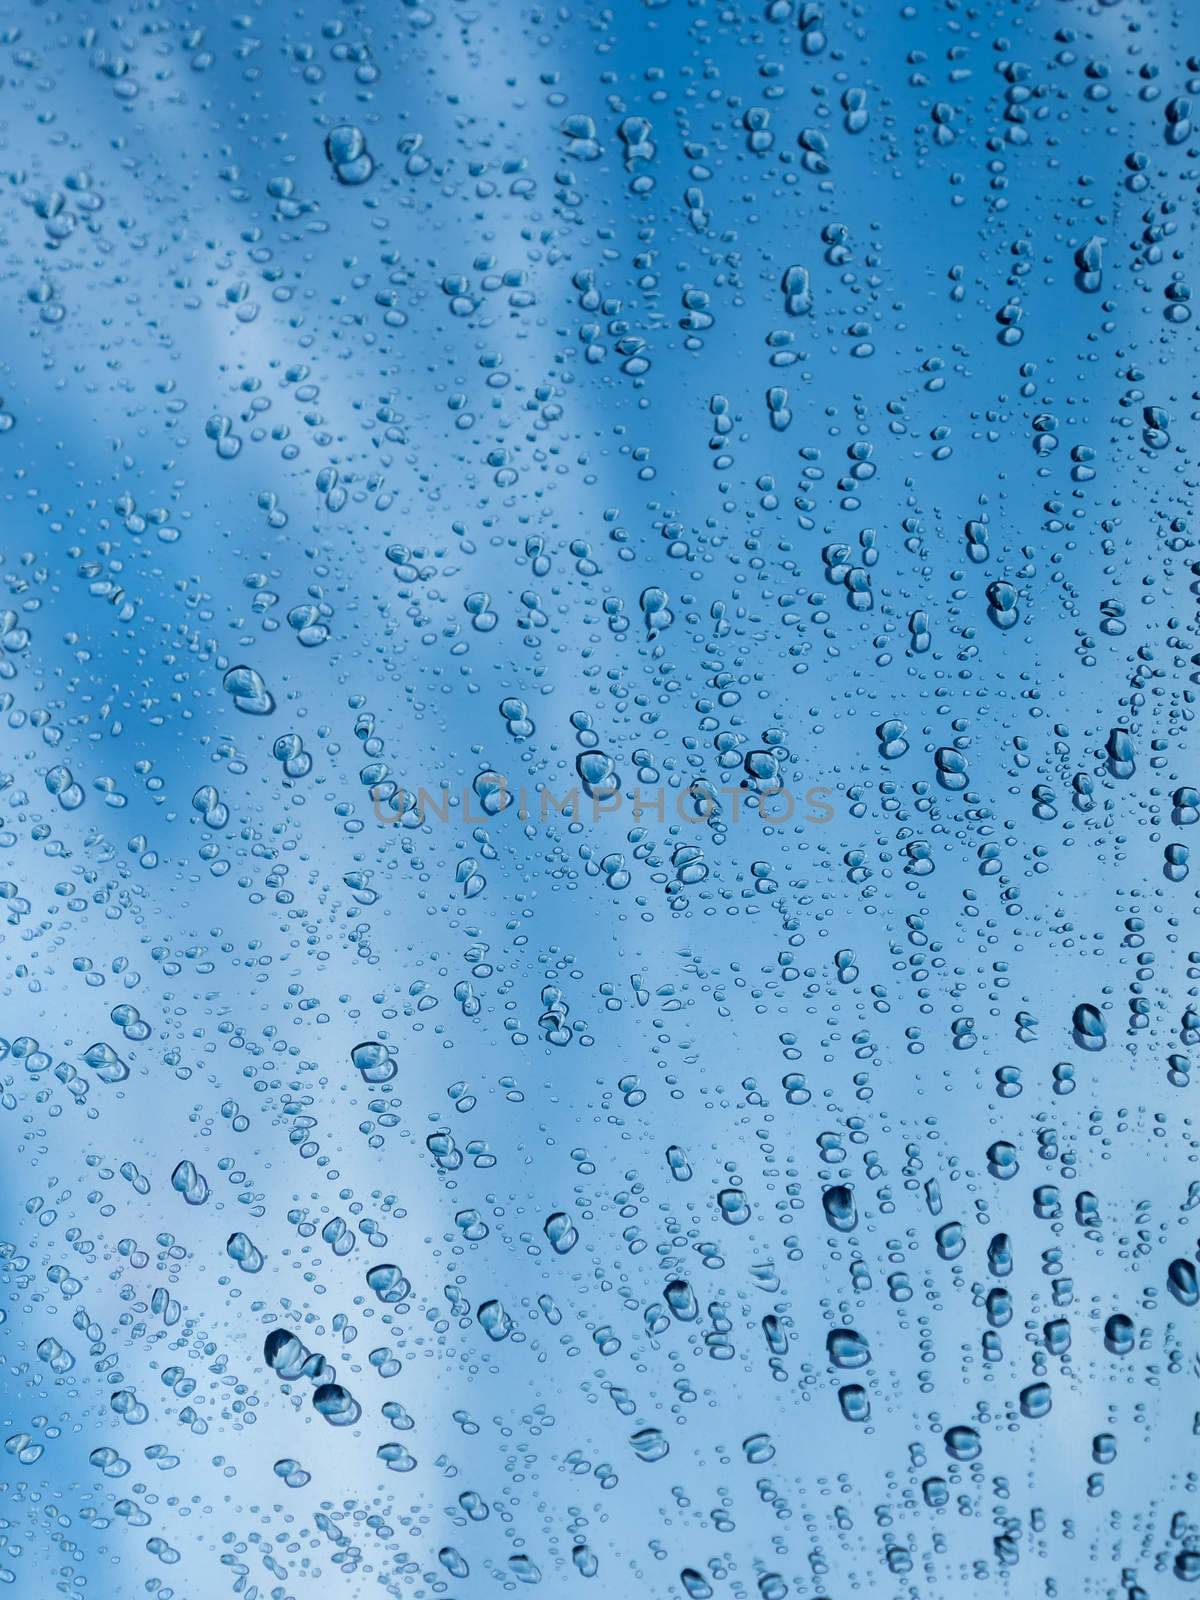 Image of droplets on window glass reflecting the blue sky.